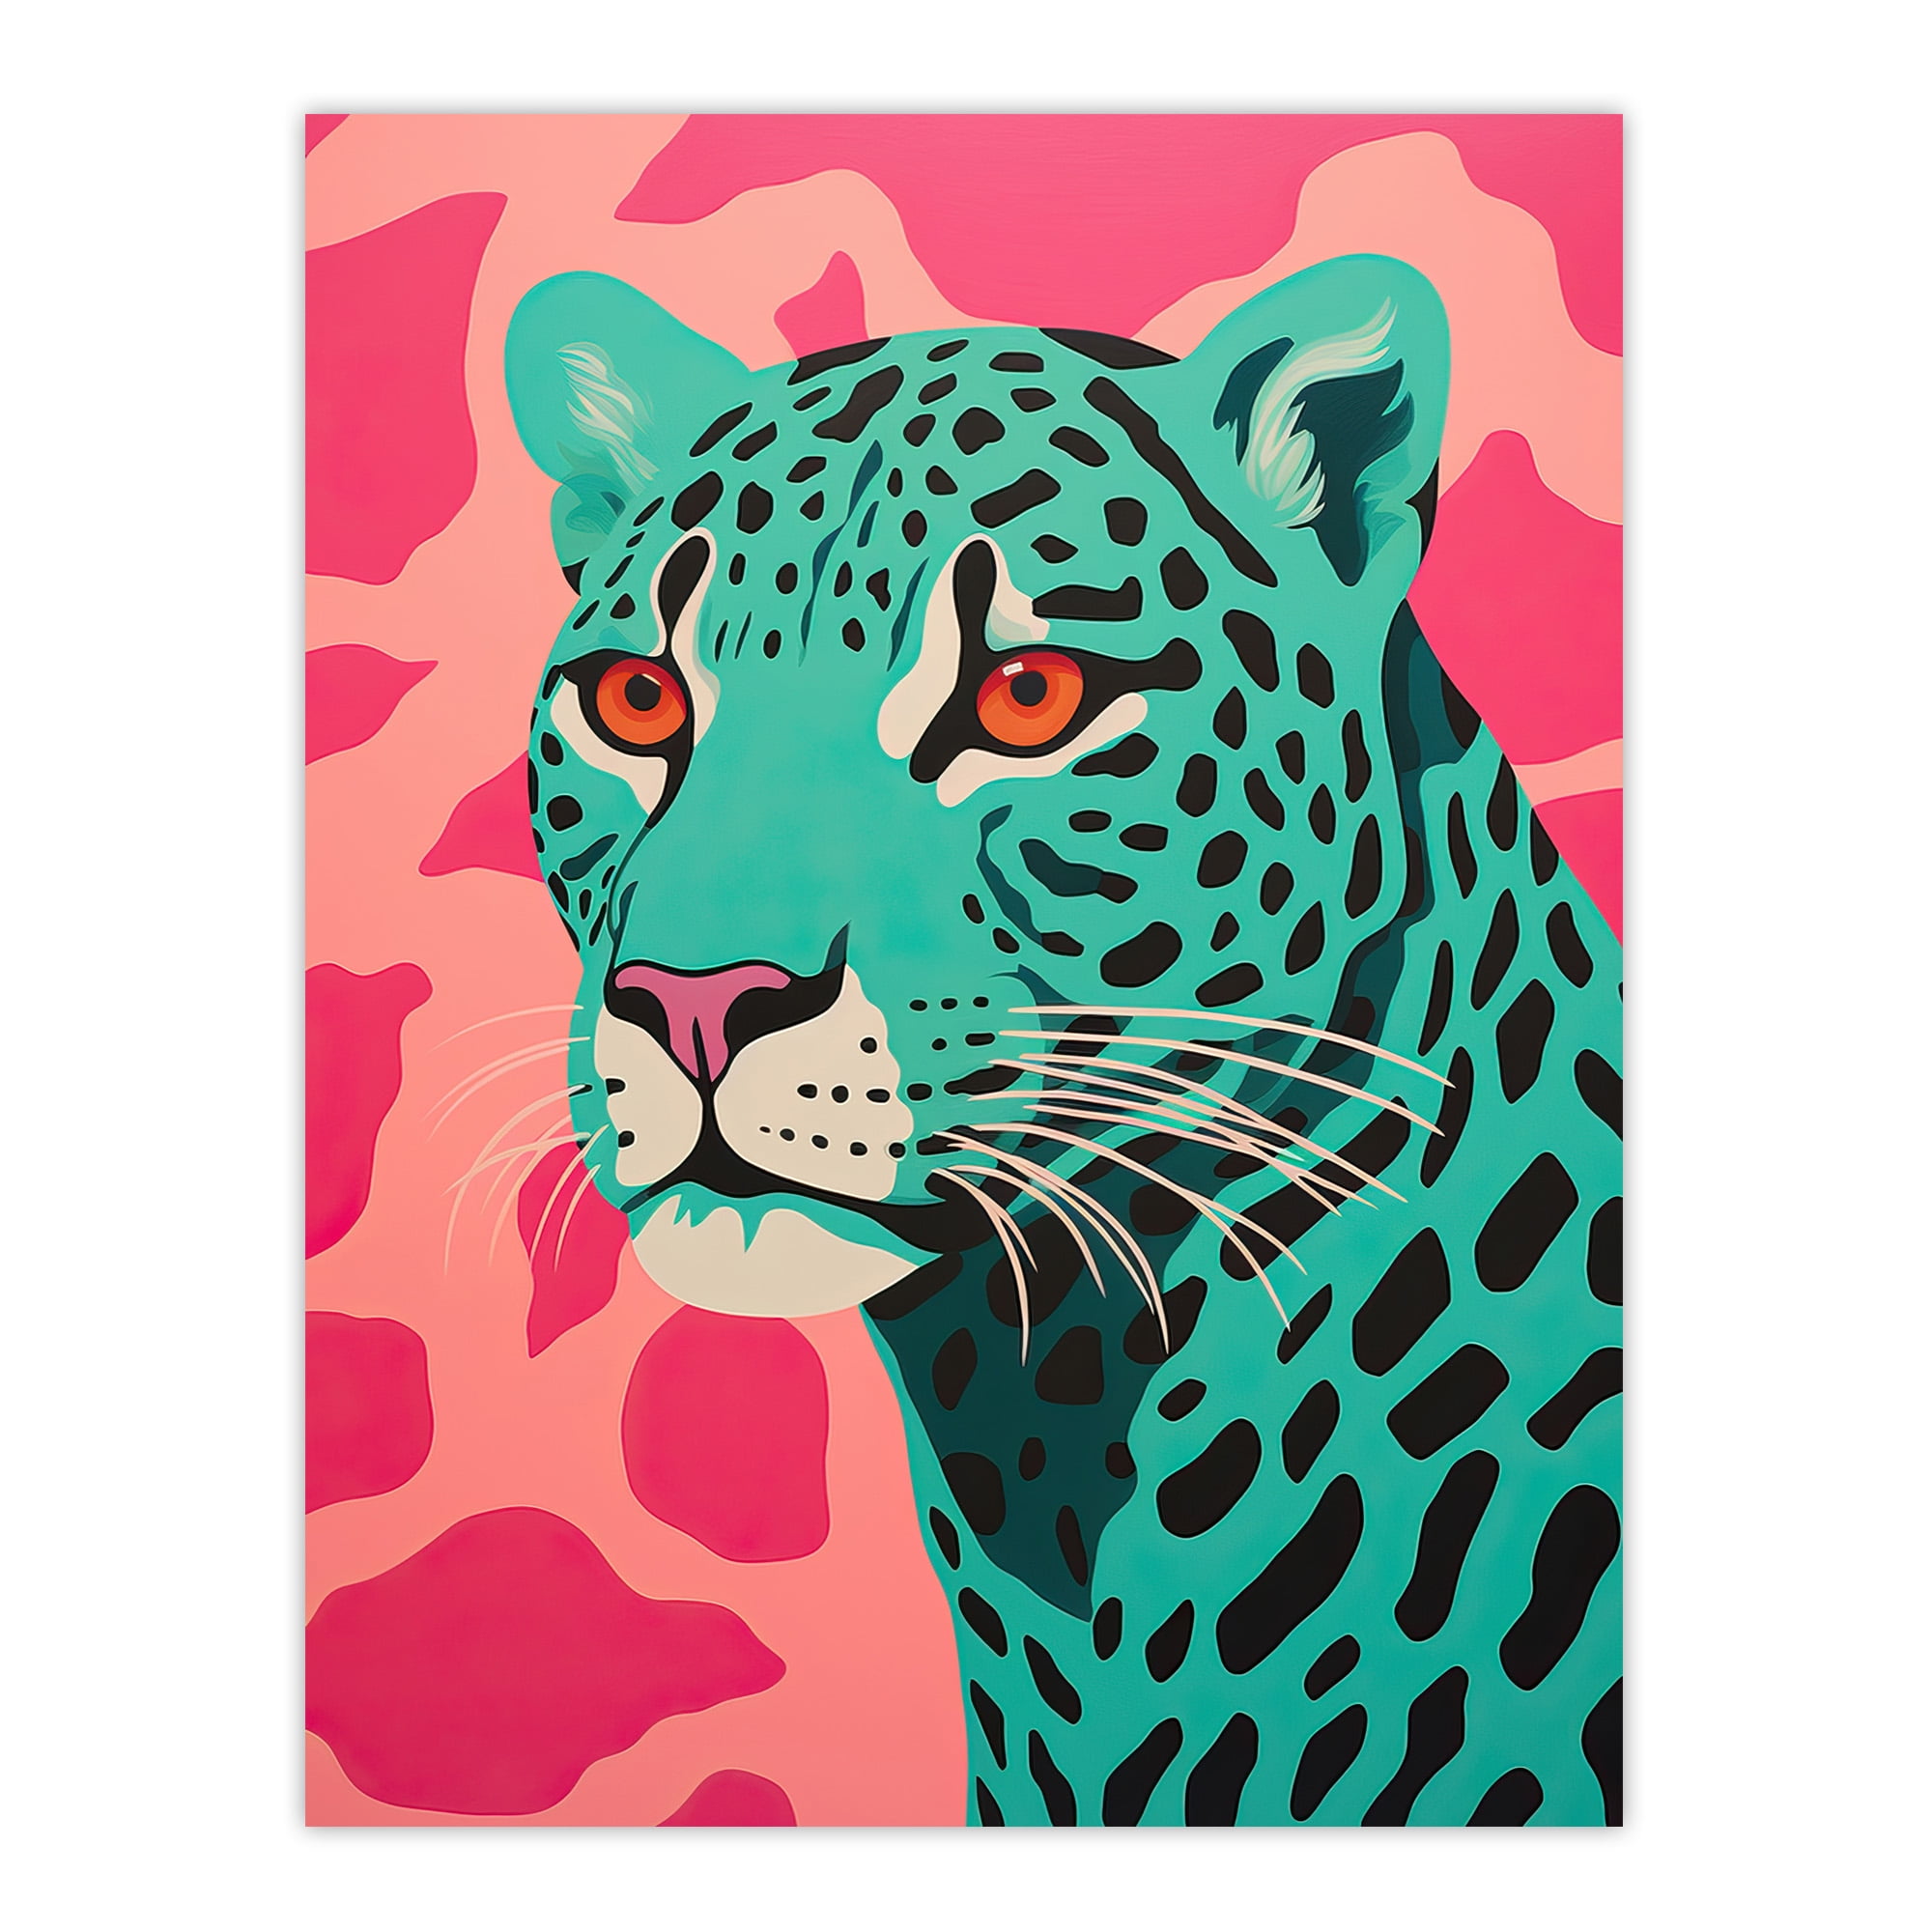 Modern Aqua Green Leopard Print On Pink Pop Art Style Risograph Artwork  Painting Large Wall Art Poster Print Thick Paper 18X24 Inch